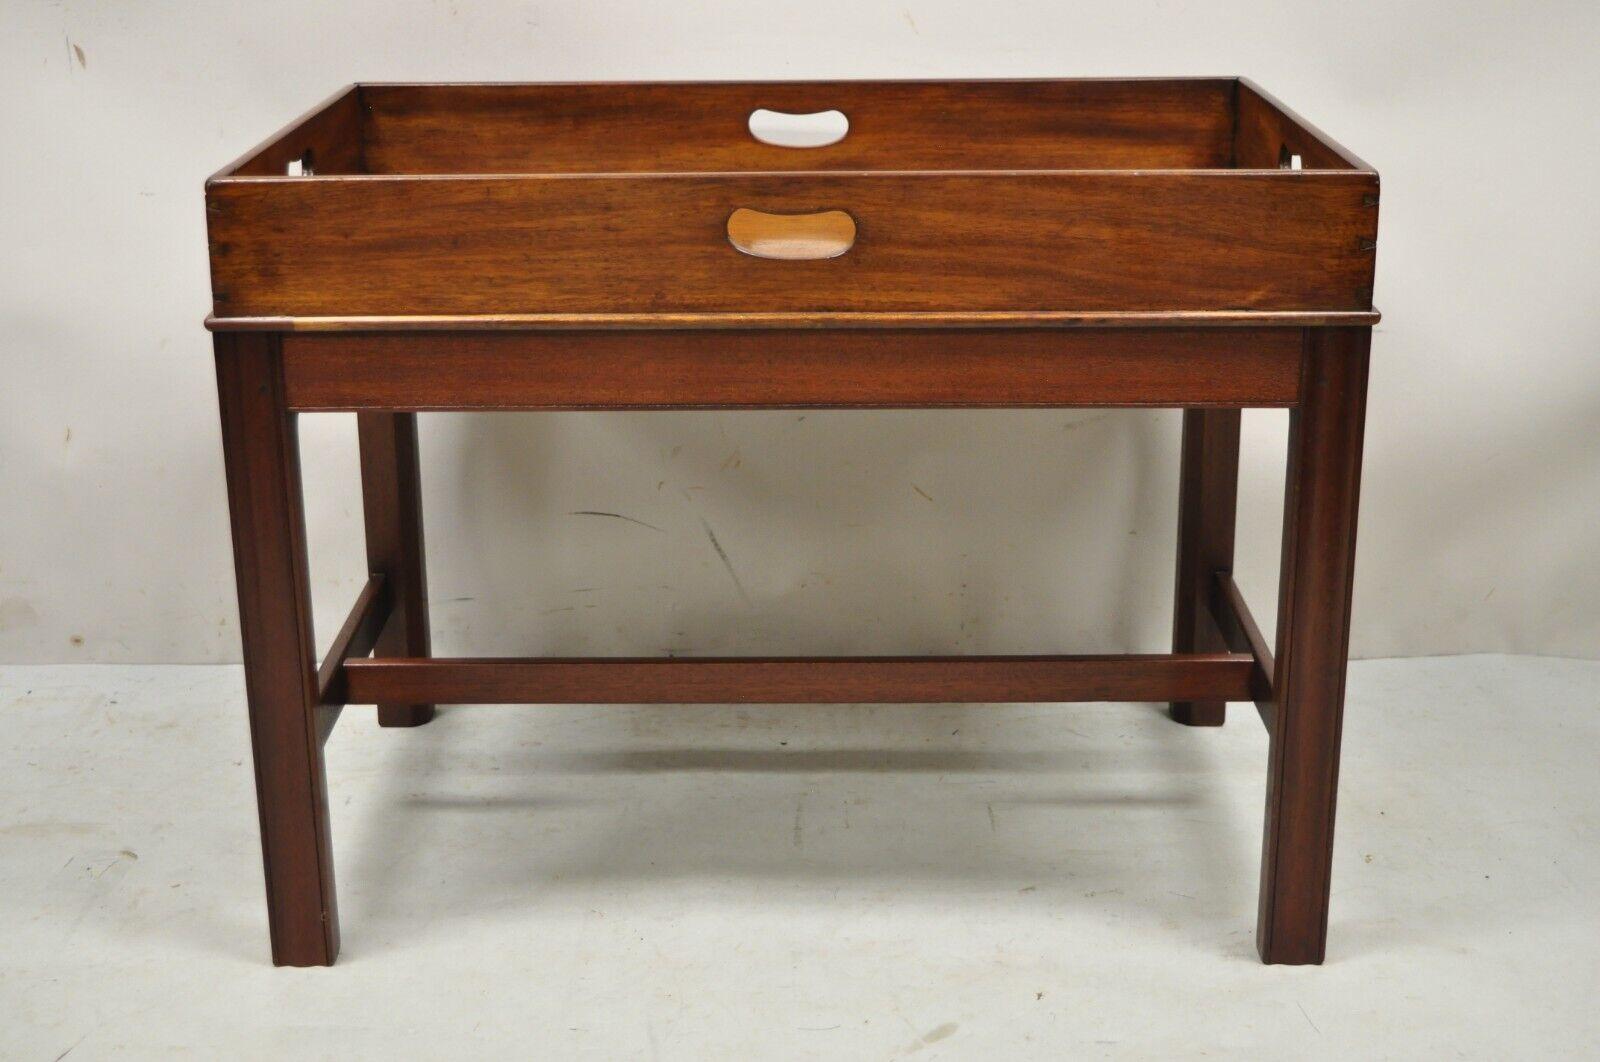 Antique English Georgian mahogany Butler's Style coffee table with Dovetail. Item features dovetailed joints, stretcher base, (4) carved handles, solid wood construction, beautiful wood grain, very nice antique item, stamped 